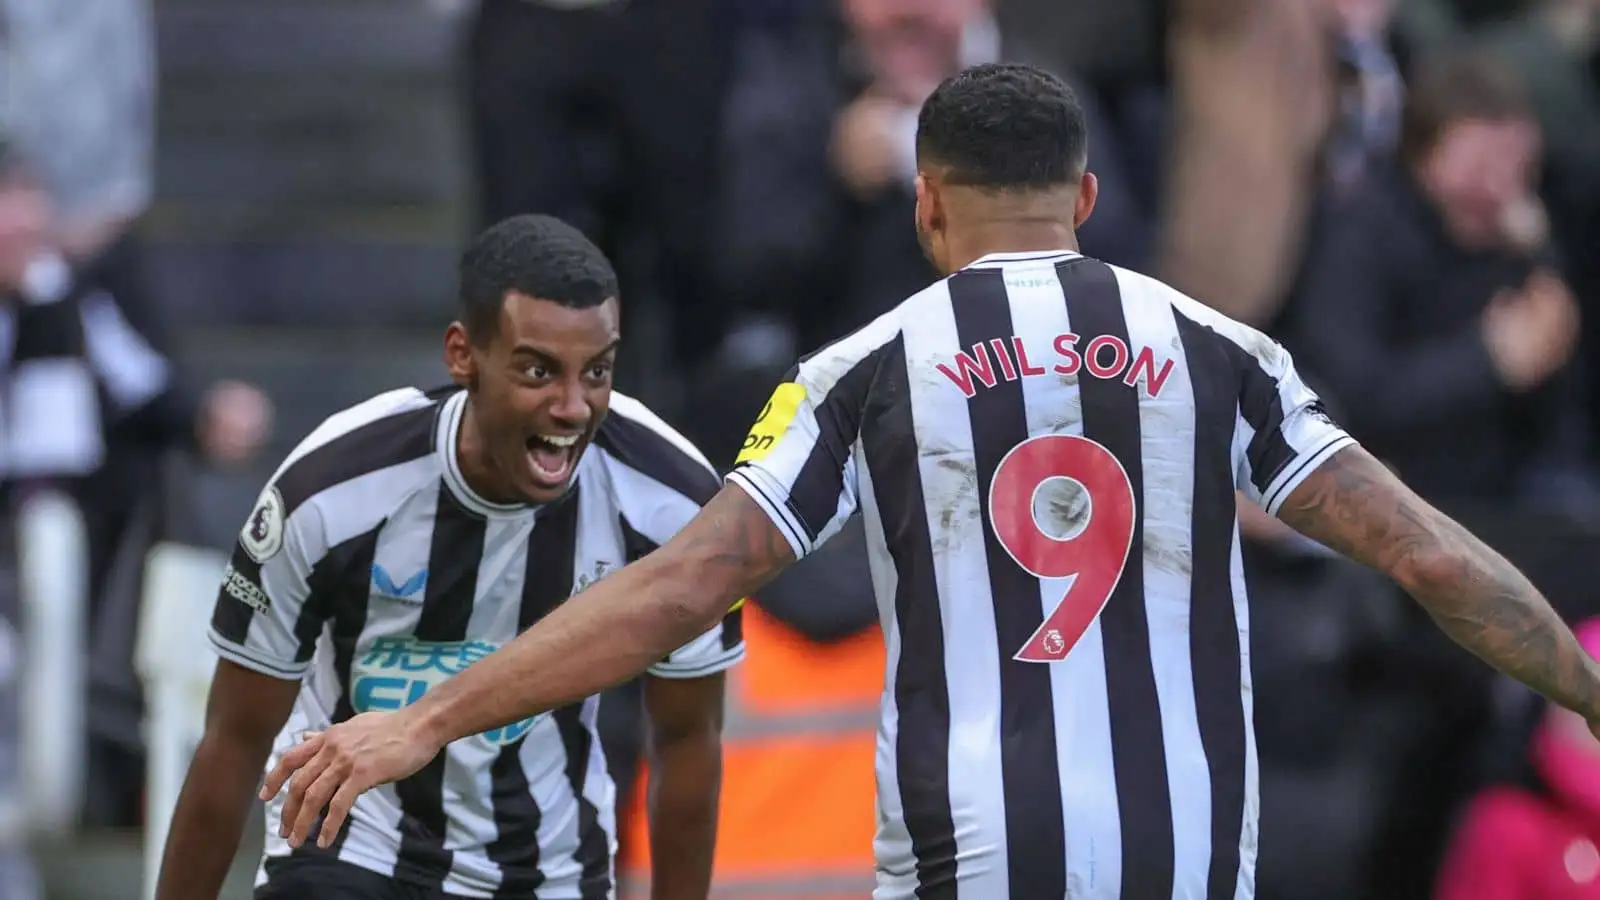 Alexander Isak of Newcastle United celebrates his goal to make it 1-0 with Callum Wilson of Newcastle United during the Premier League match Newcastle United vs Fulham at St. James's Park, Newcastle